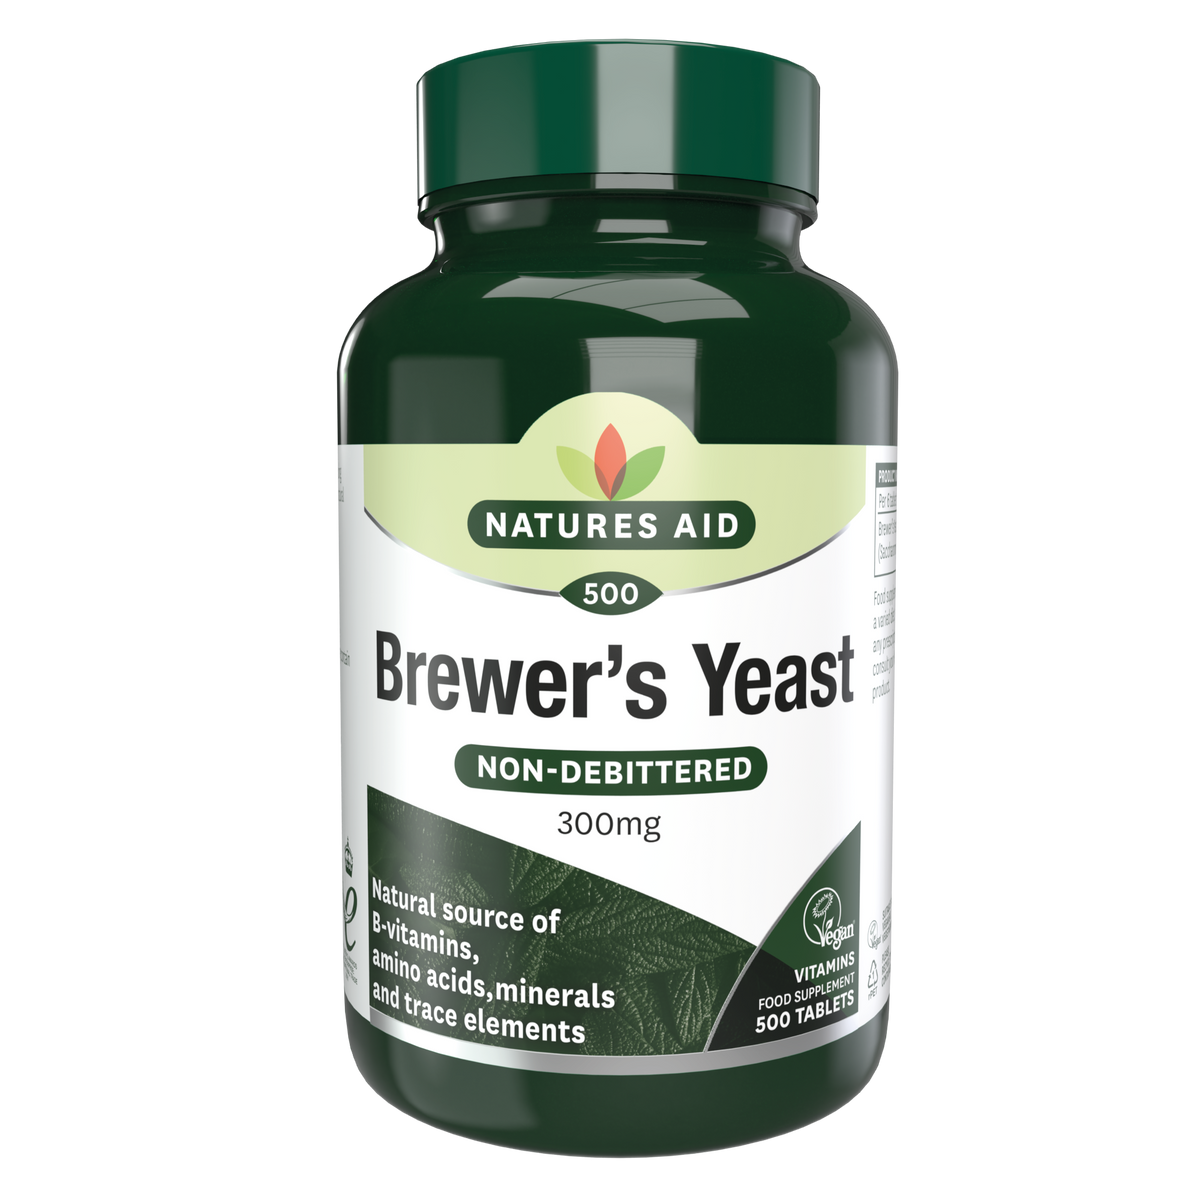 Natures Aid Brewers Yeast 300mg (500)